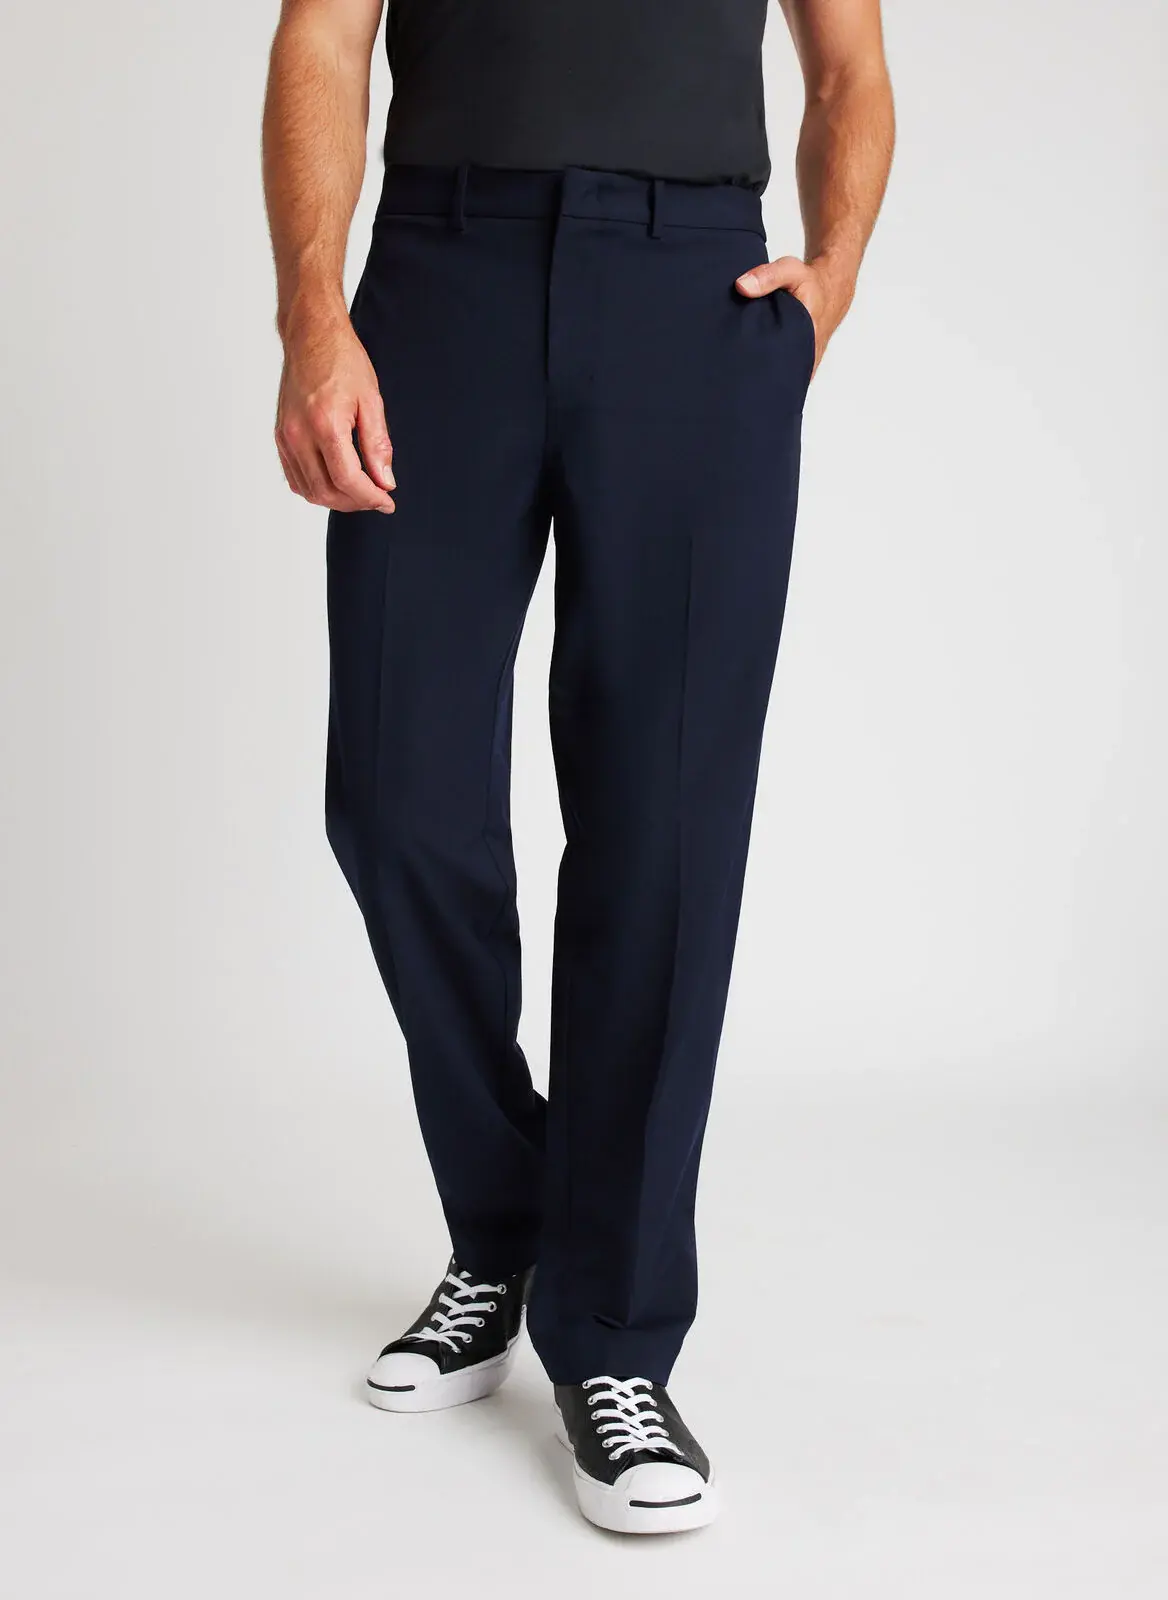 Kit And Ace Stellar Recycled Suiting Trousers Standard Fit. 1